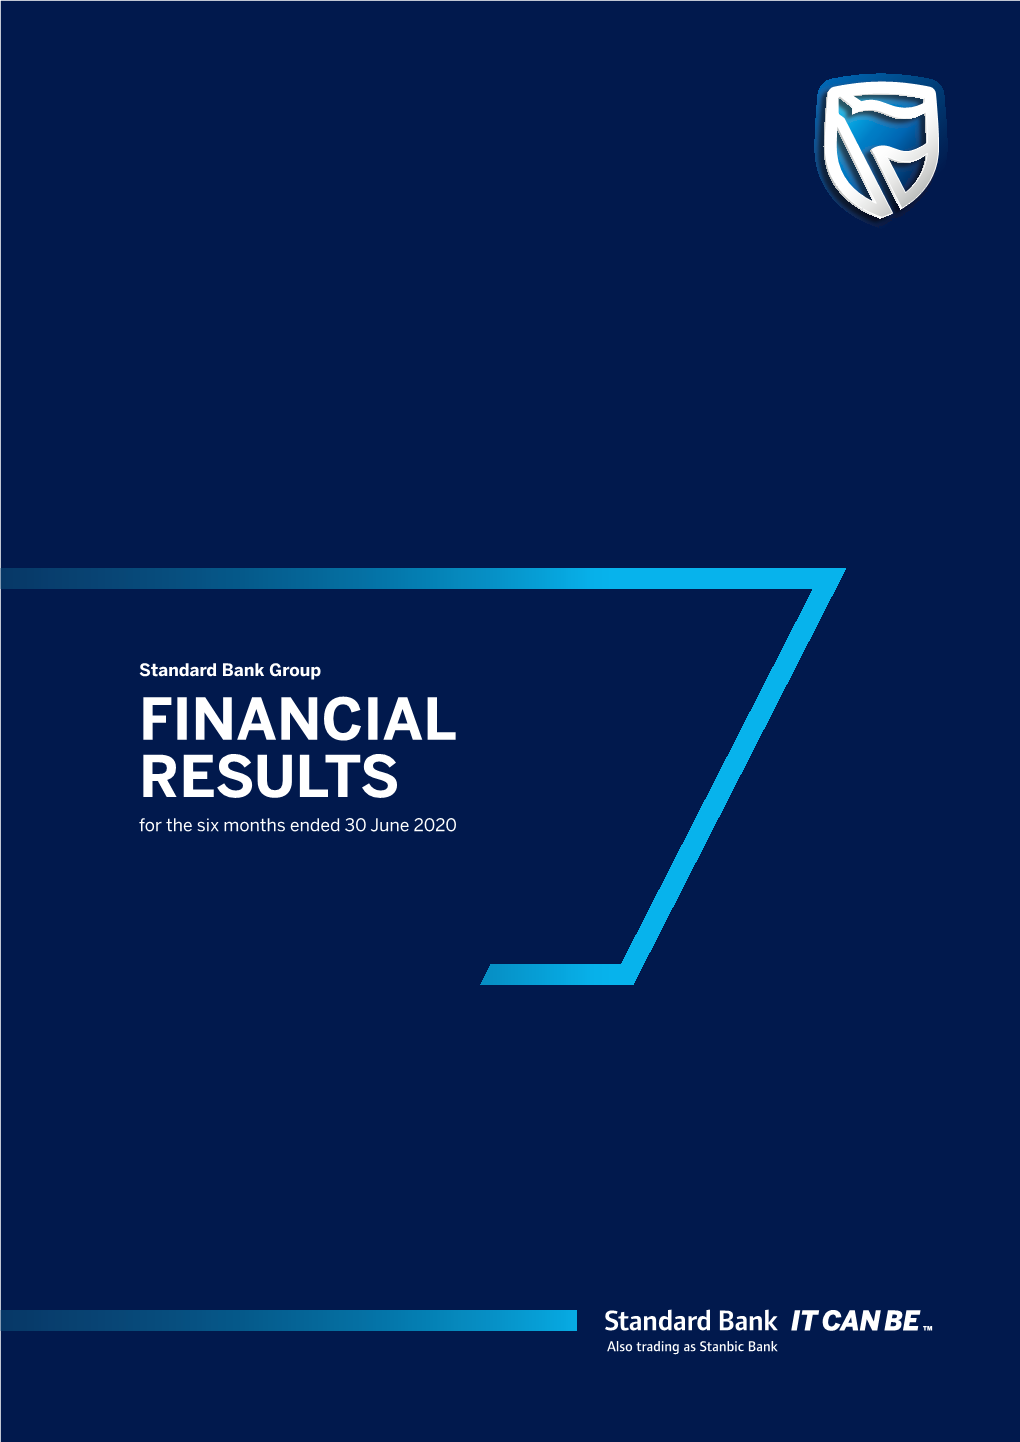 FINANCIAL RESULTS for the Six Months Ended 30 June 2020